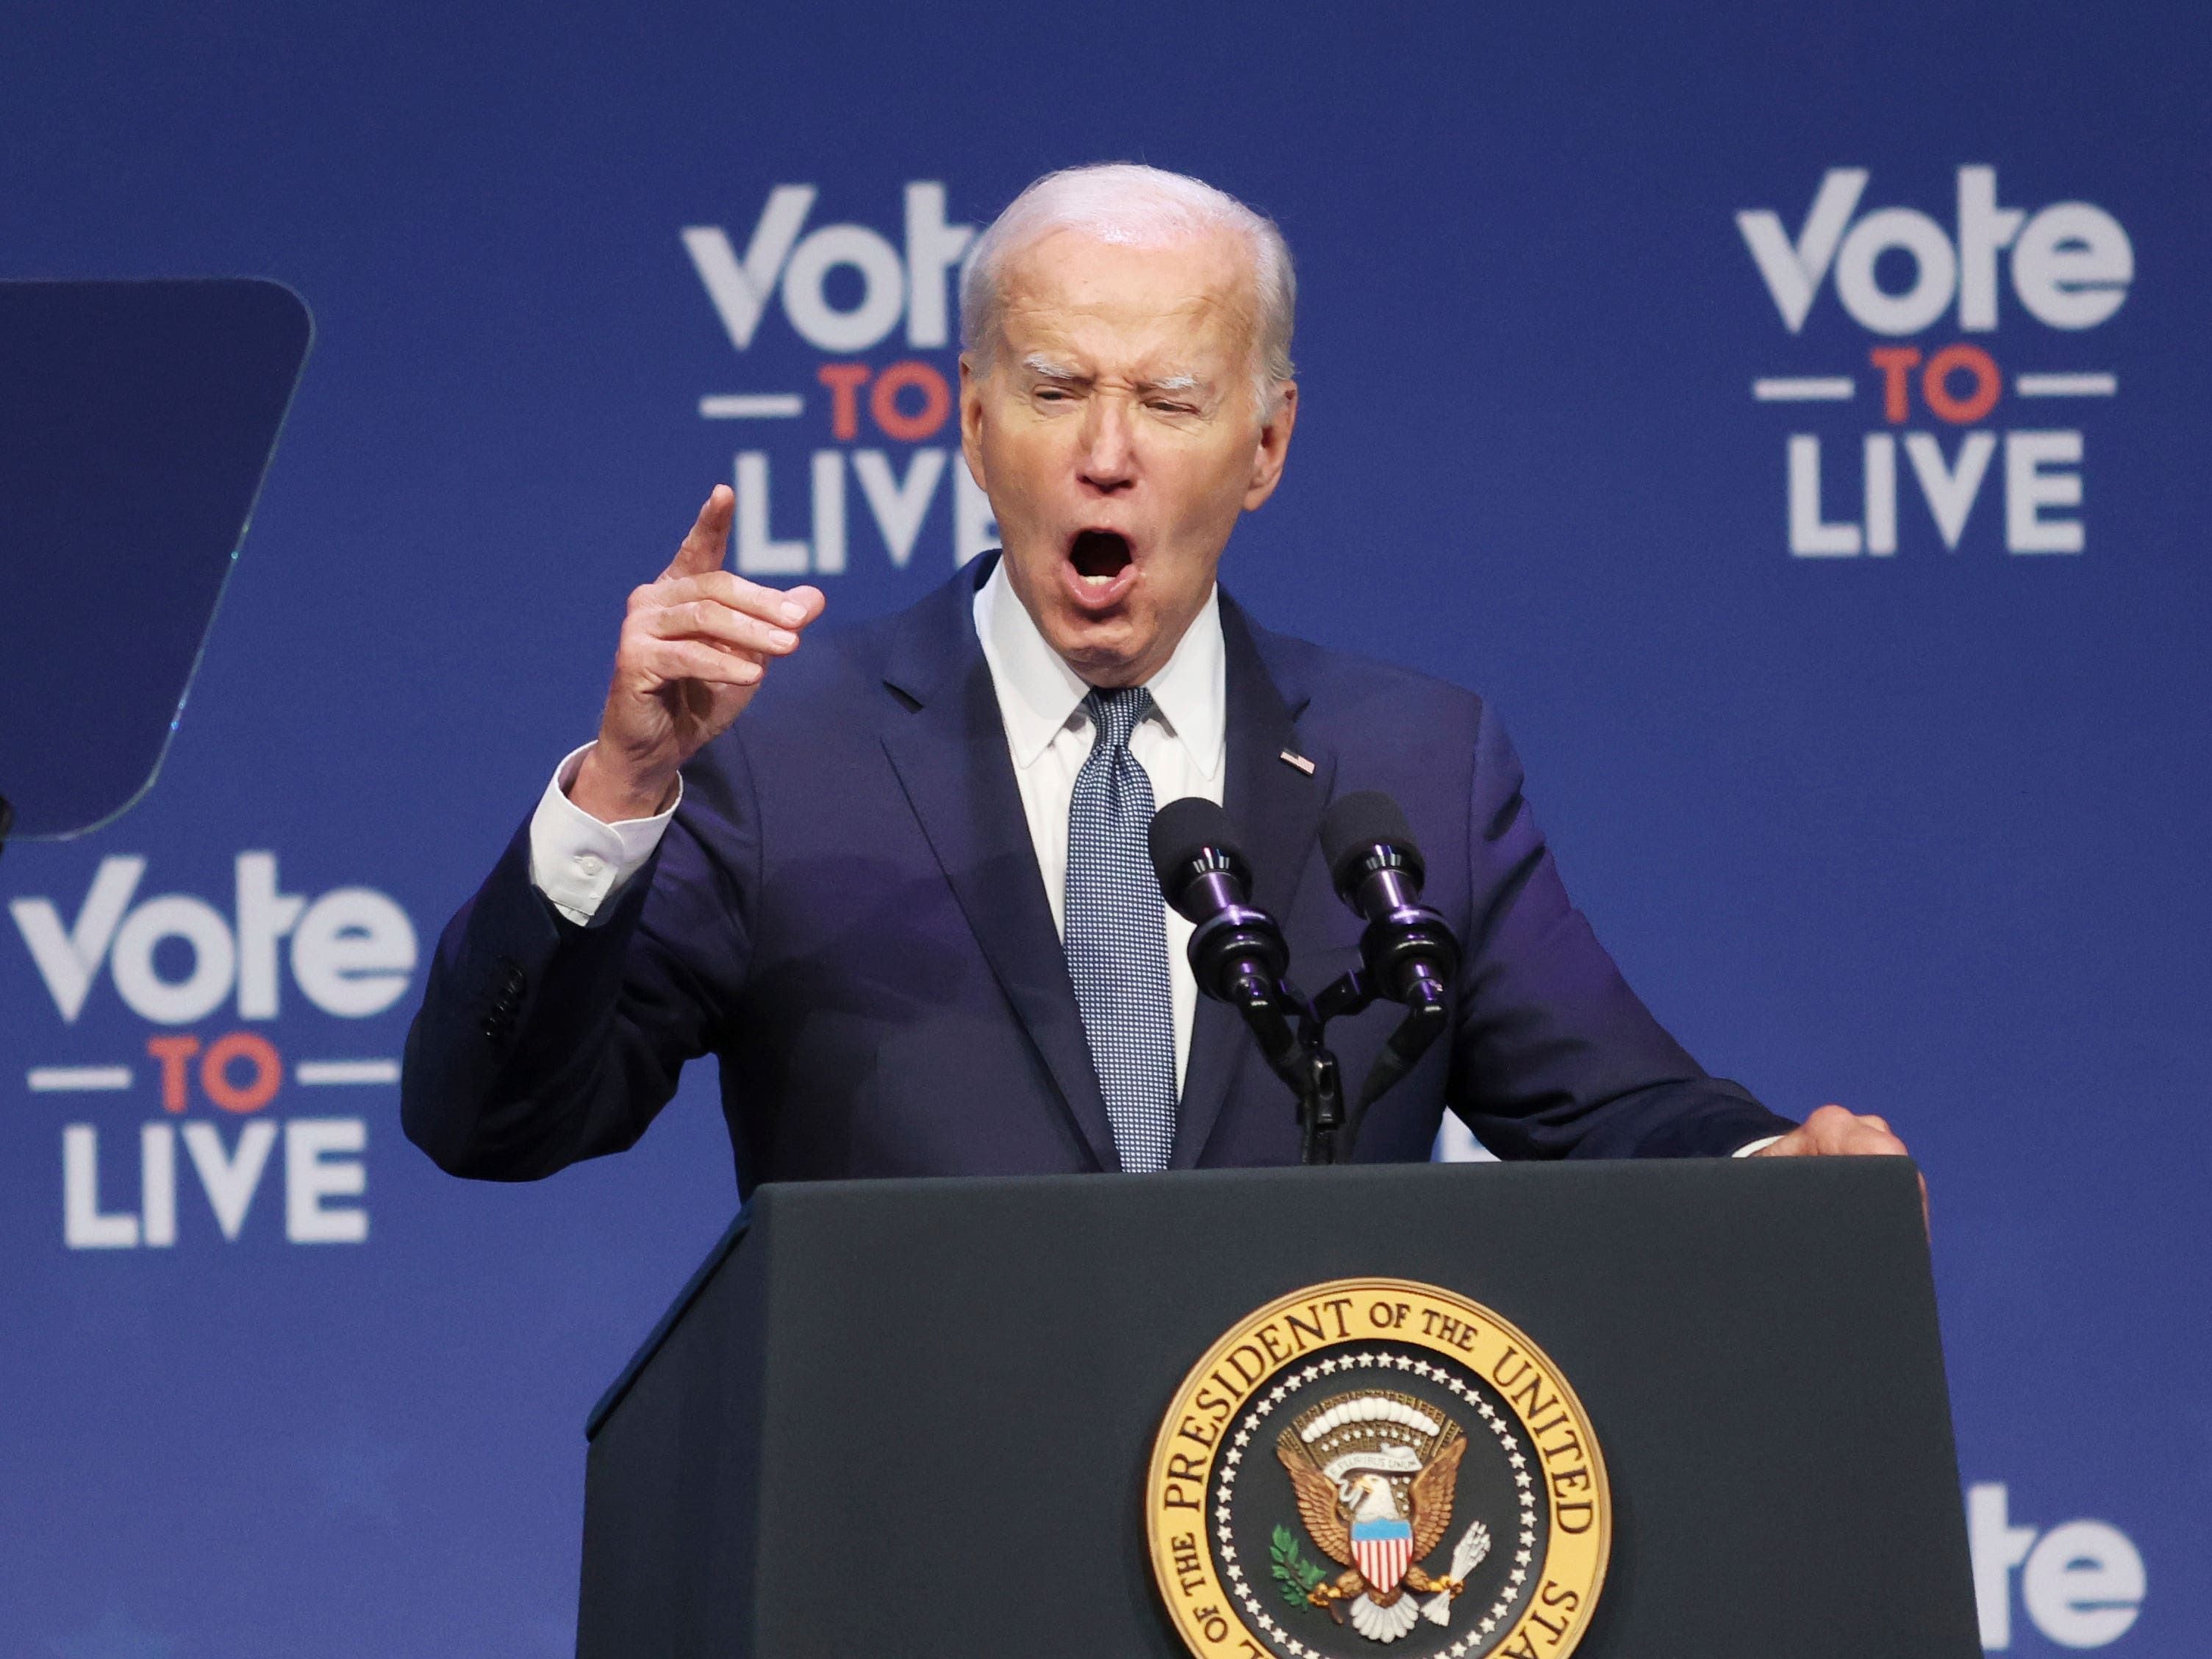 Democrats aim to nominate president in early August as some push Biden to quit